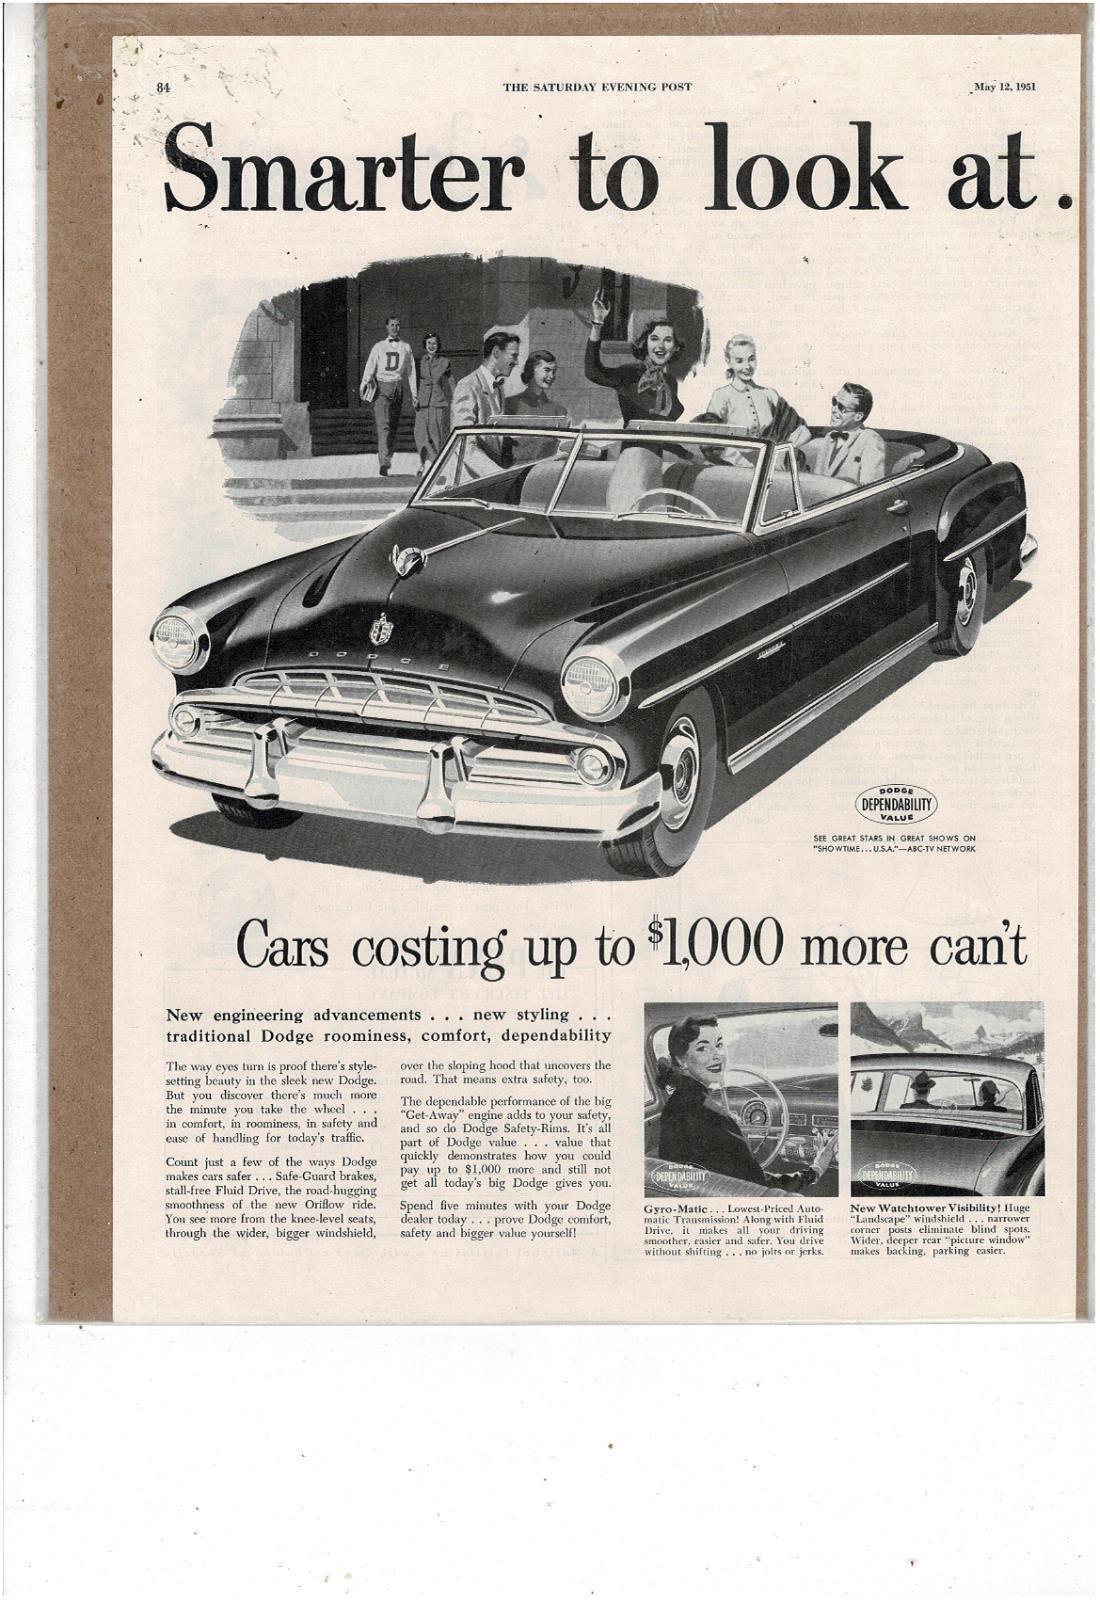 MAY 12 1951 SATURDAY EVENING POST DODGE SMARTER SAFER DEPENDABLE AD PRINT H893